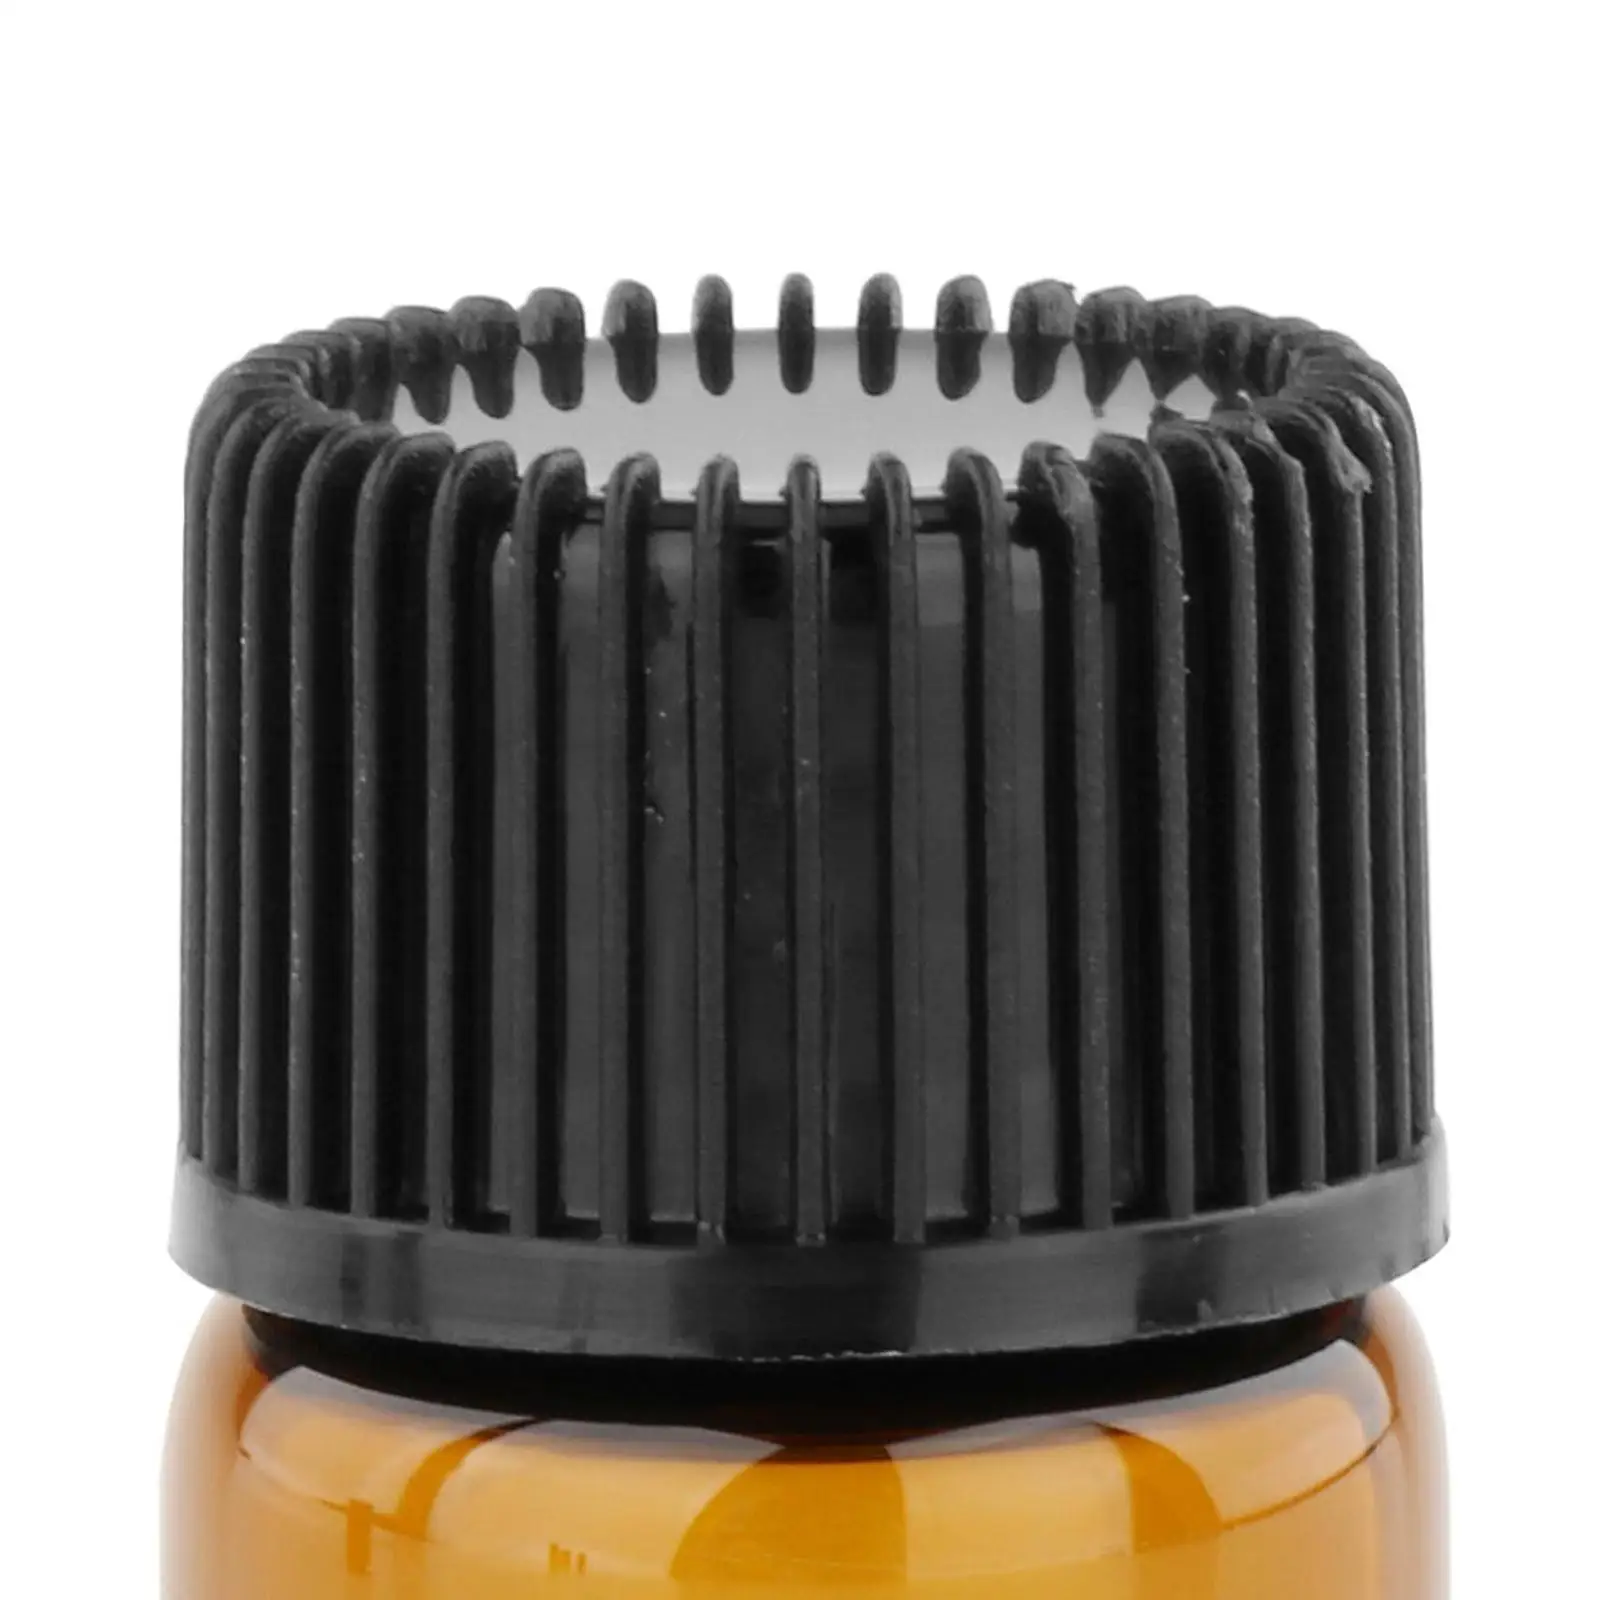 100pcs Mini Essential Oil Bottles Empty Container Bottles DIY Accessories Perfume Dispenser for Traveling Amber Glass Vials